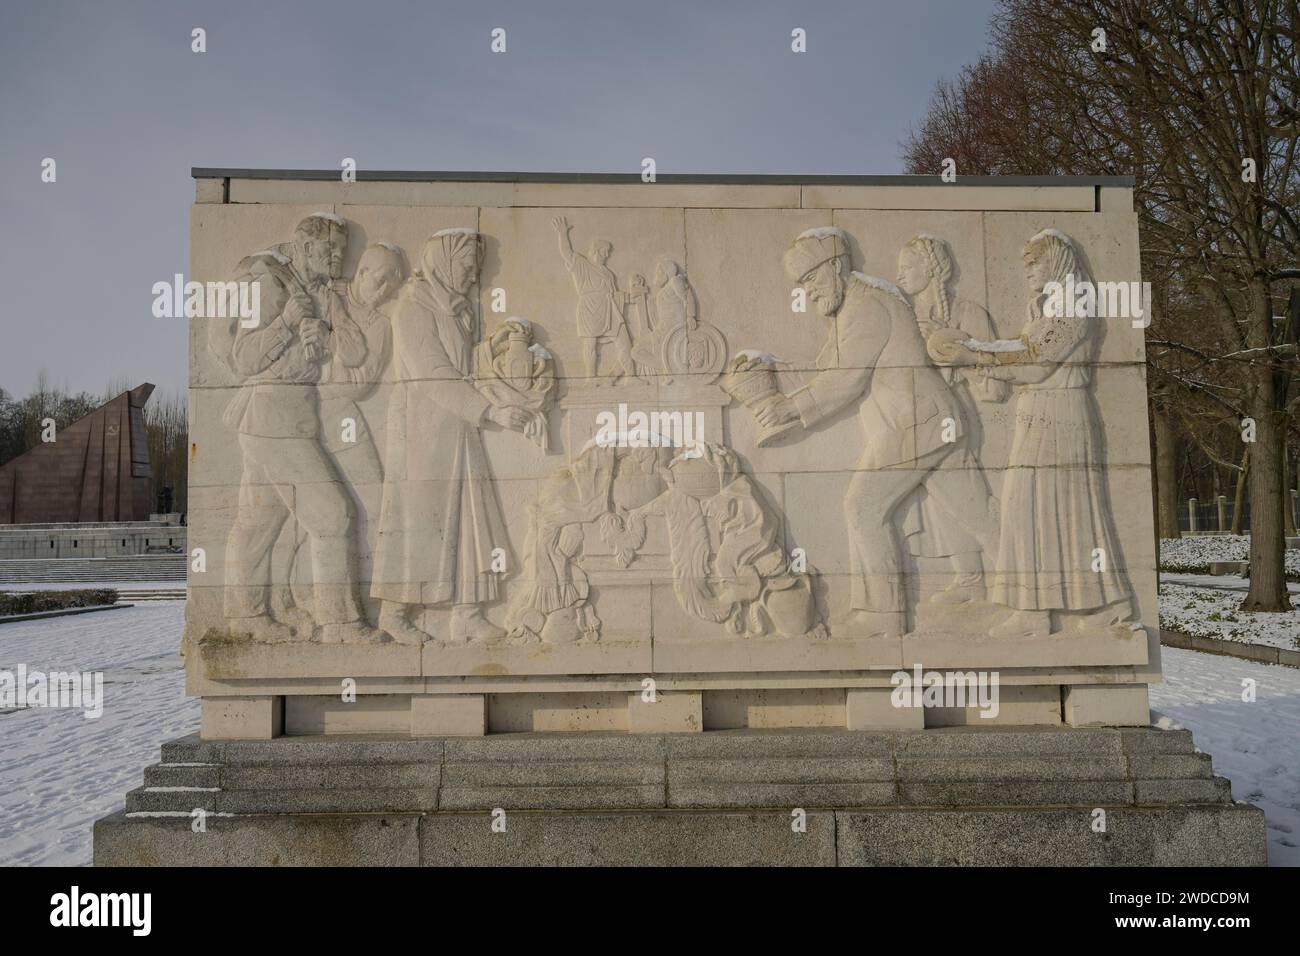 Sarcophagus with stone relief, Theme: Sacrifice and renunciation of the Soviet people and support of the army, Soviet memorial, Winter, Treptower Stock Photo